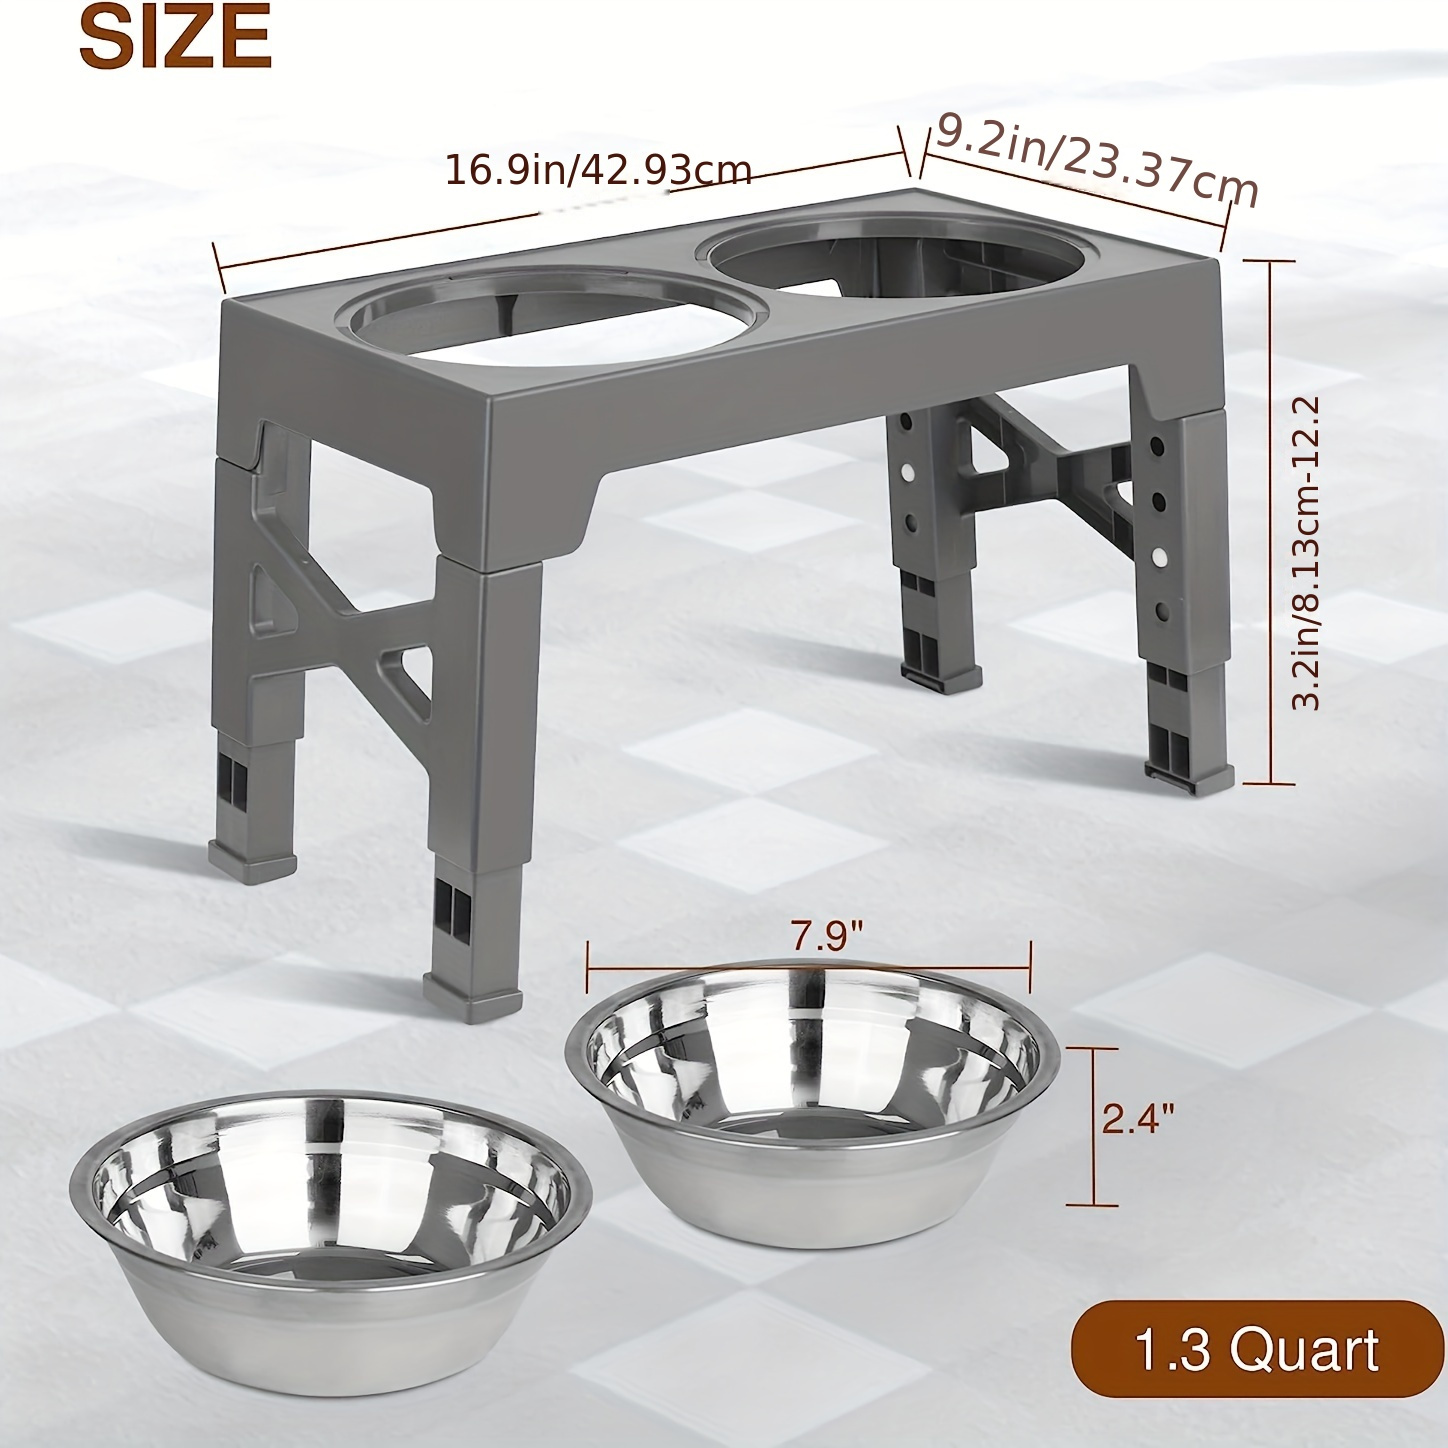 Elevated Dog Bowls, 5 Adjustable Heights Raised Dog Food Bowl,Dog Bowl  Stand with 2 Stainless Steel Dog Food Bowls and 1 Slow Food Bowl, Dog Bowls  for